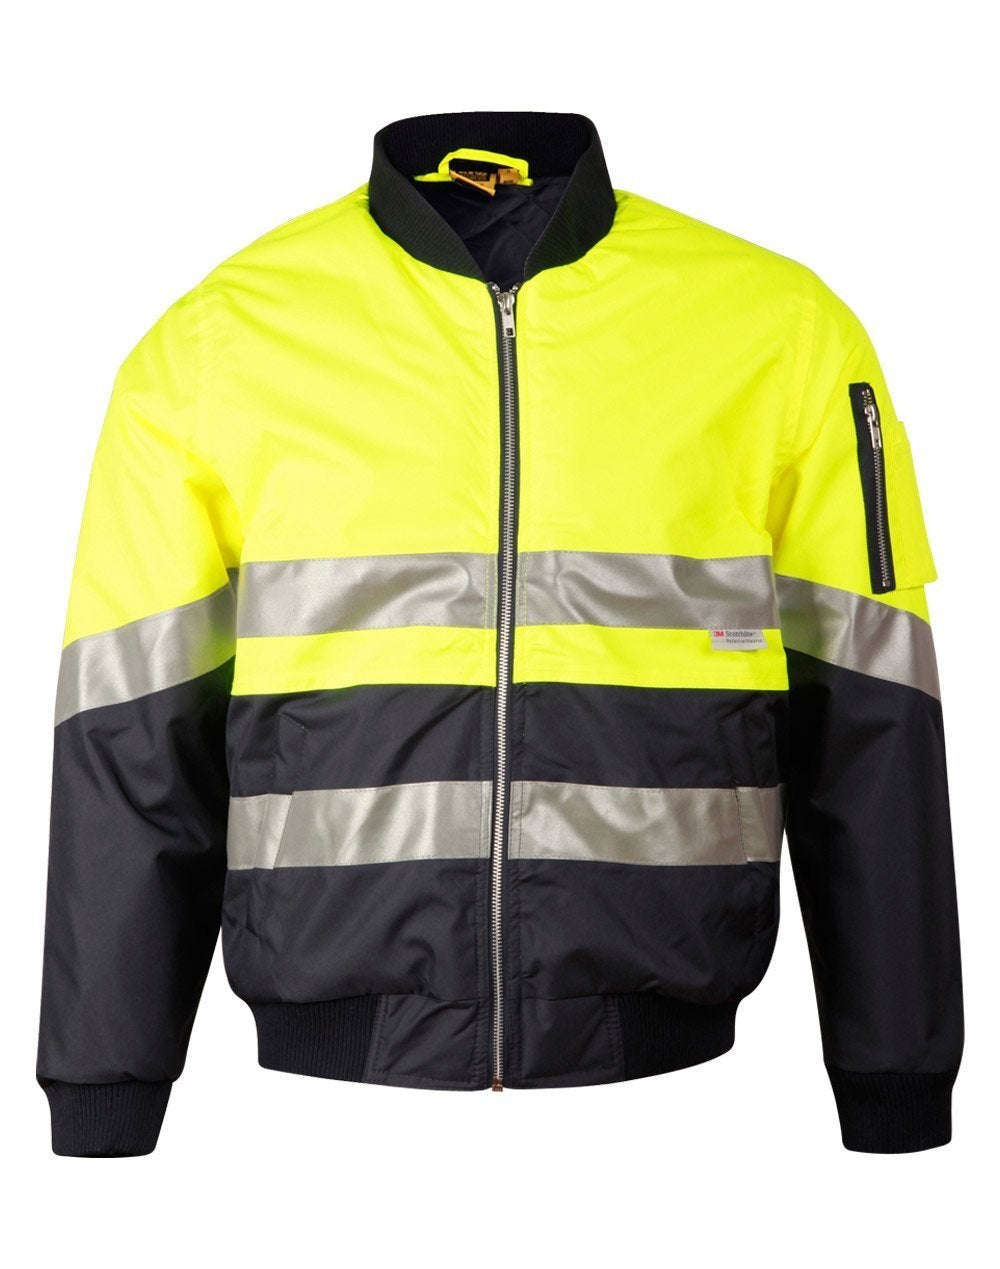 Buy custom branded Hi Vis Two Tone Flying Jackets with your logo!